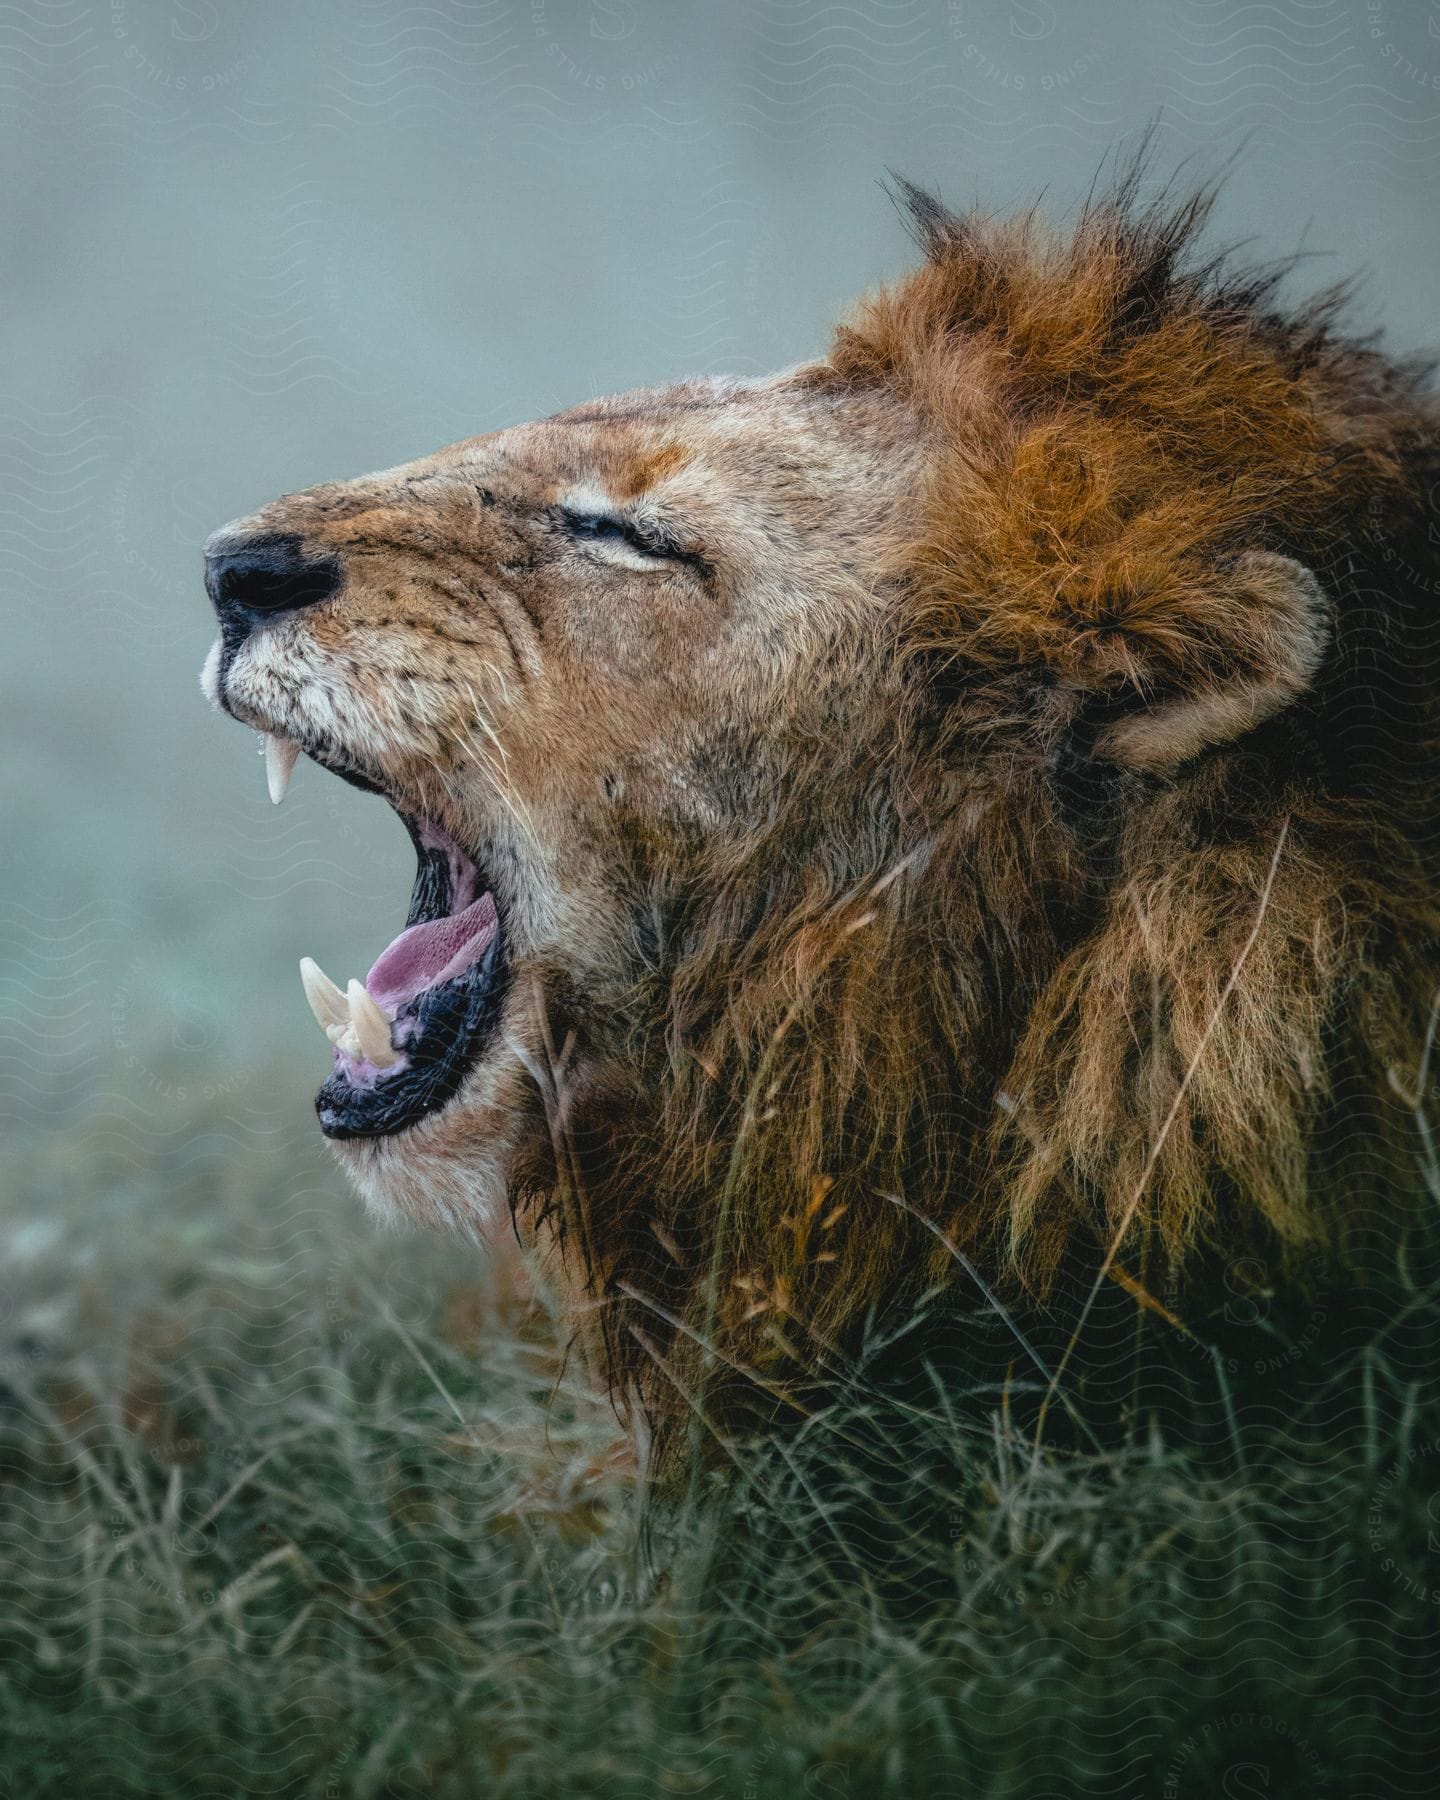 Lion closes its eyes as it yawns.